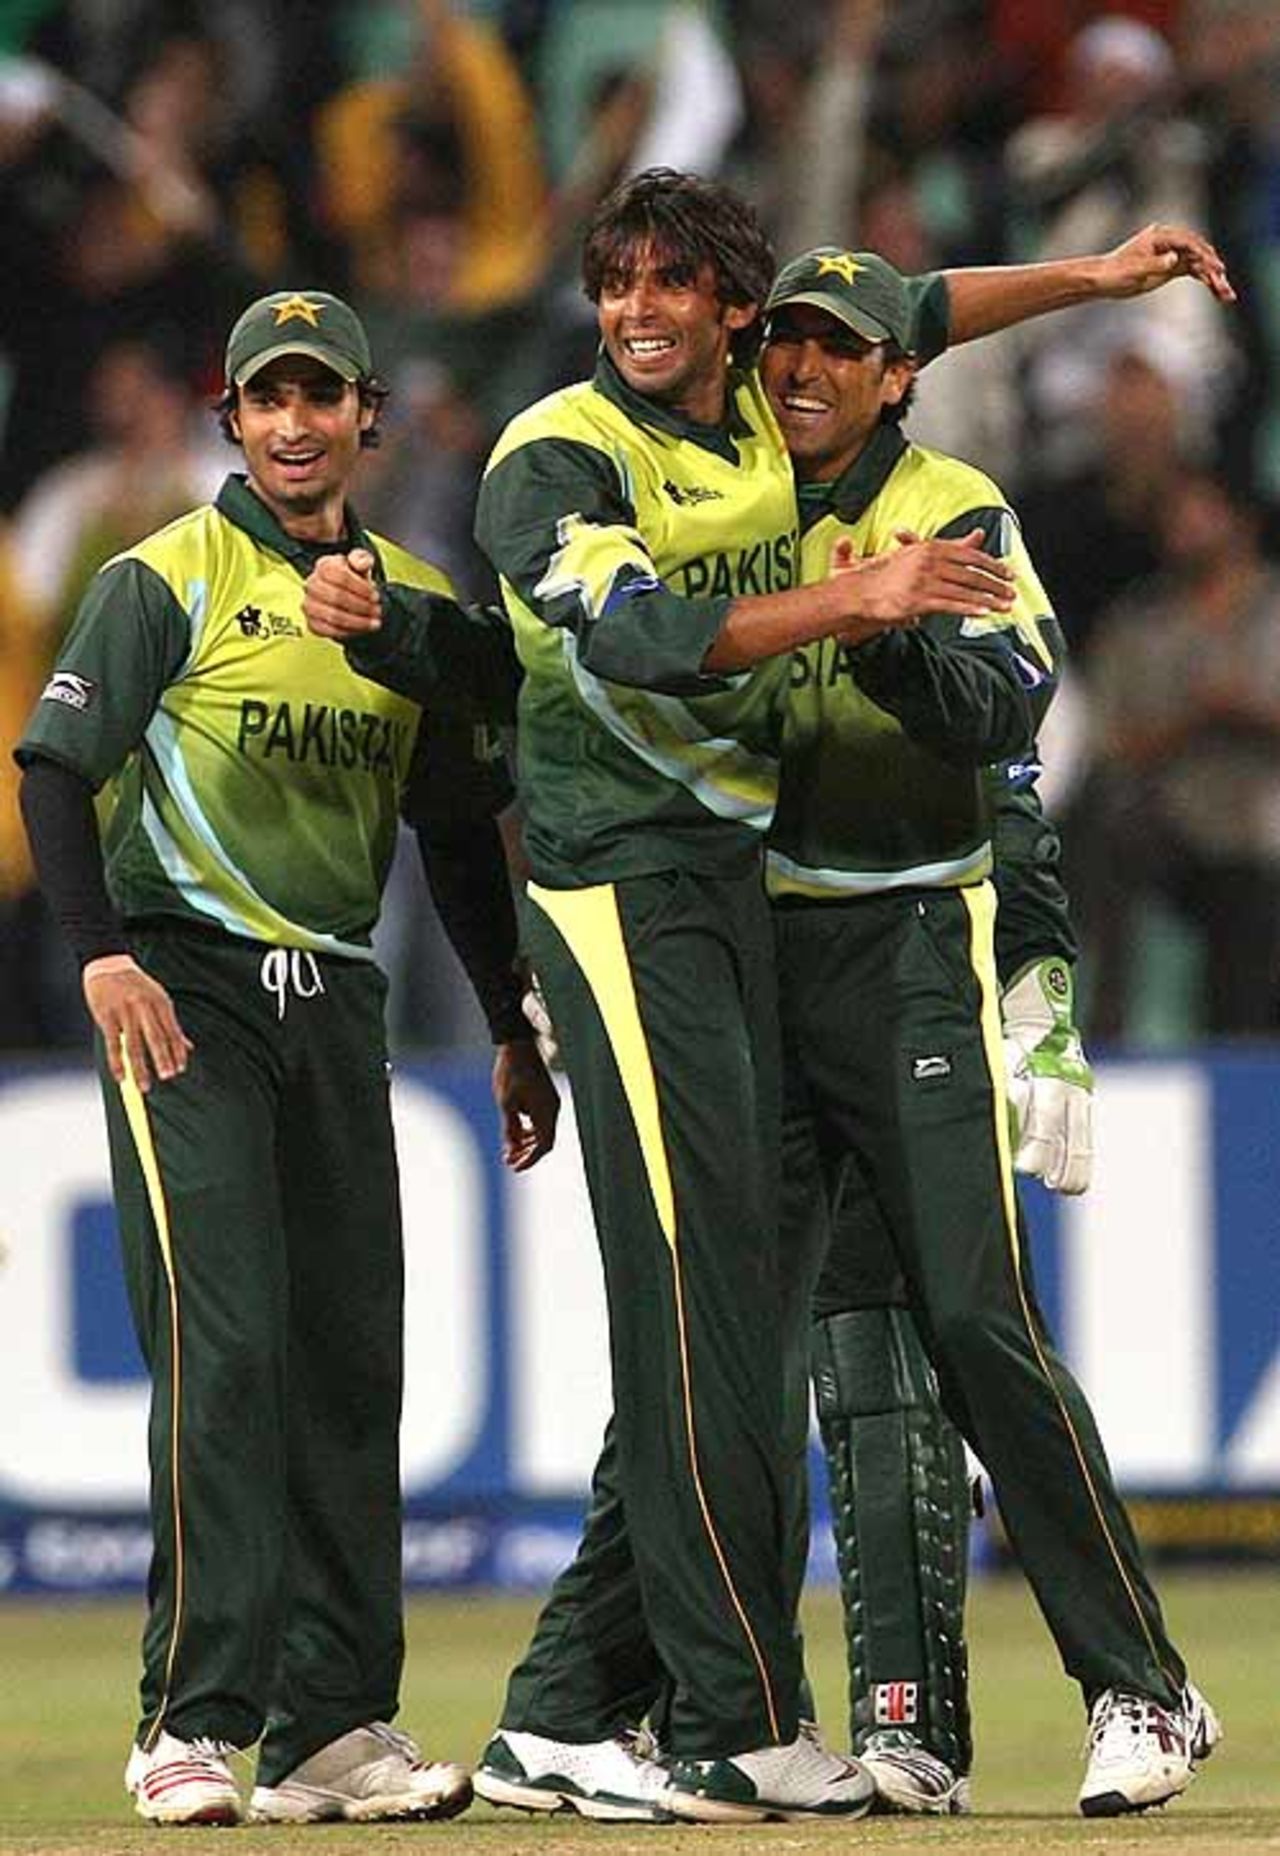 Mohammad Asif celebrates the wicket of Dinesh Karthik with Younis Khan and Imran Nazir, India v Pakistan, Group D, ICC World Twenty20, Durban, September 14, 2007 